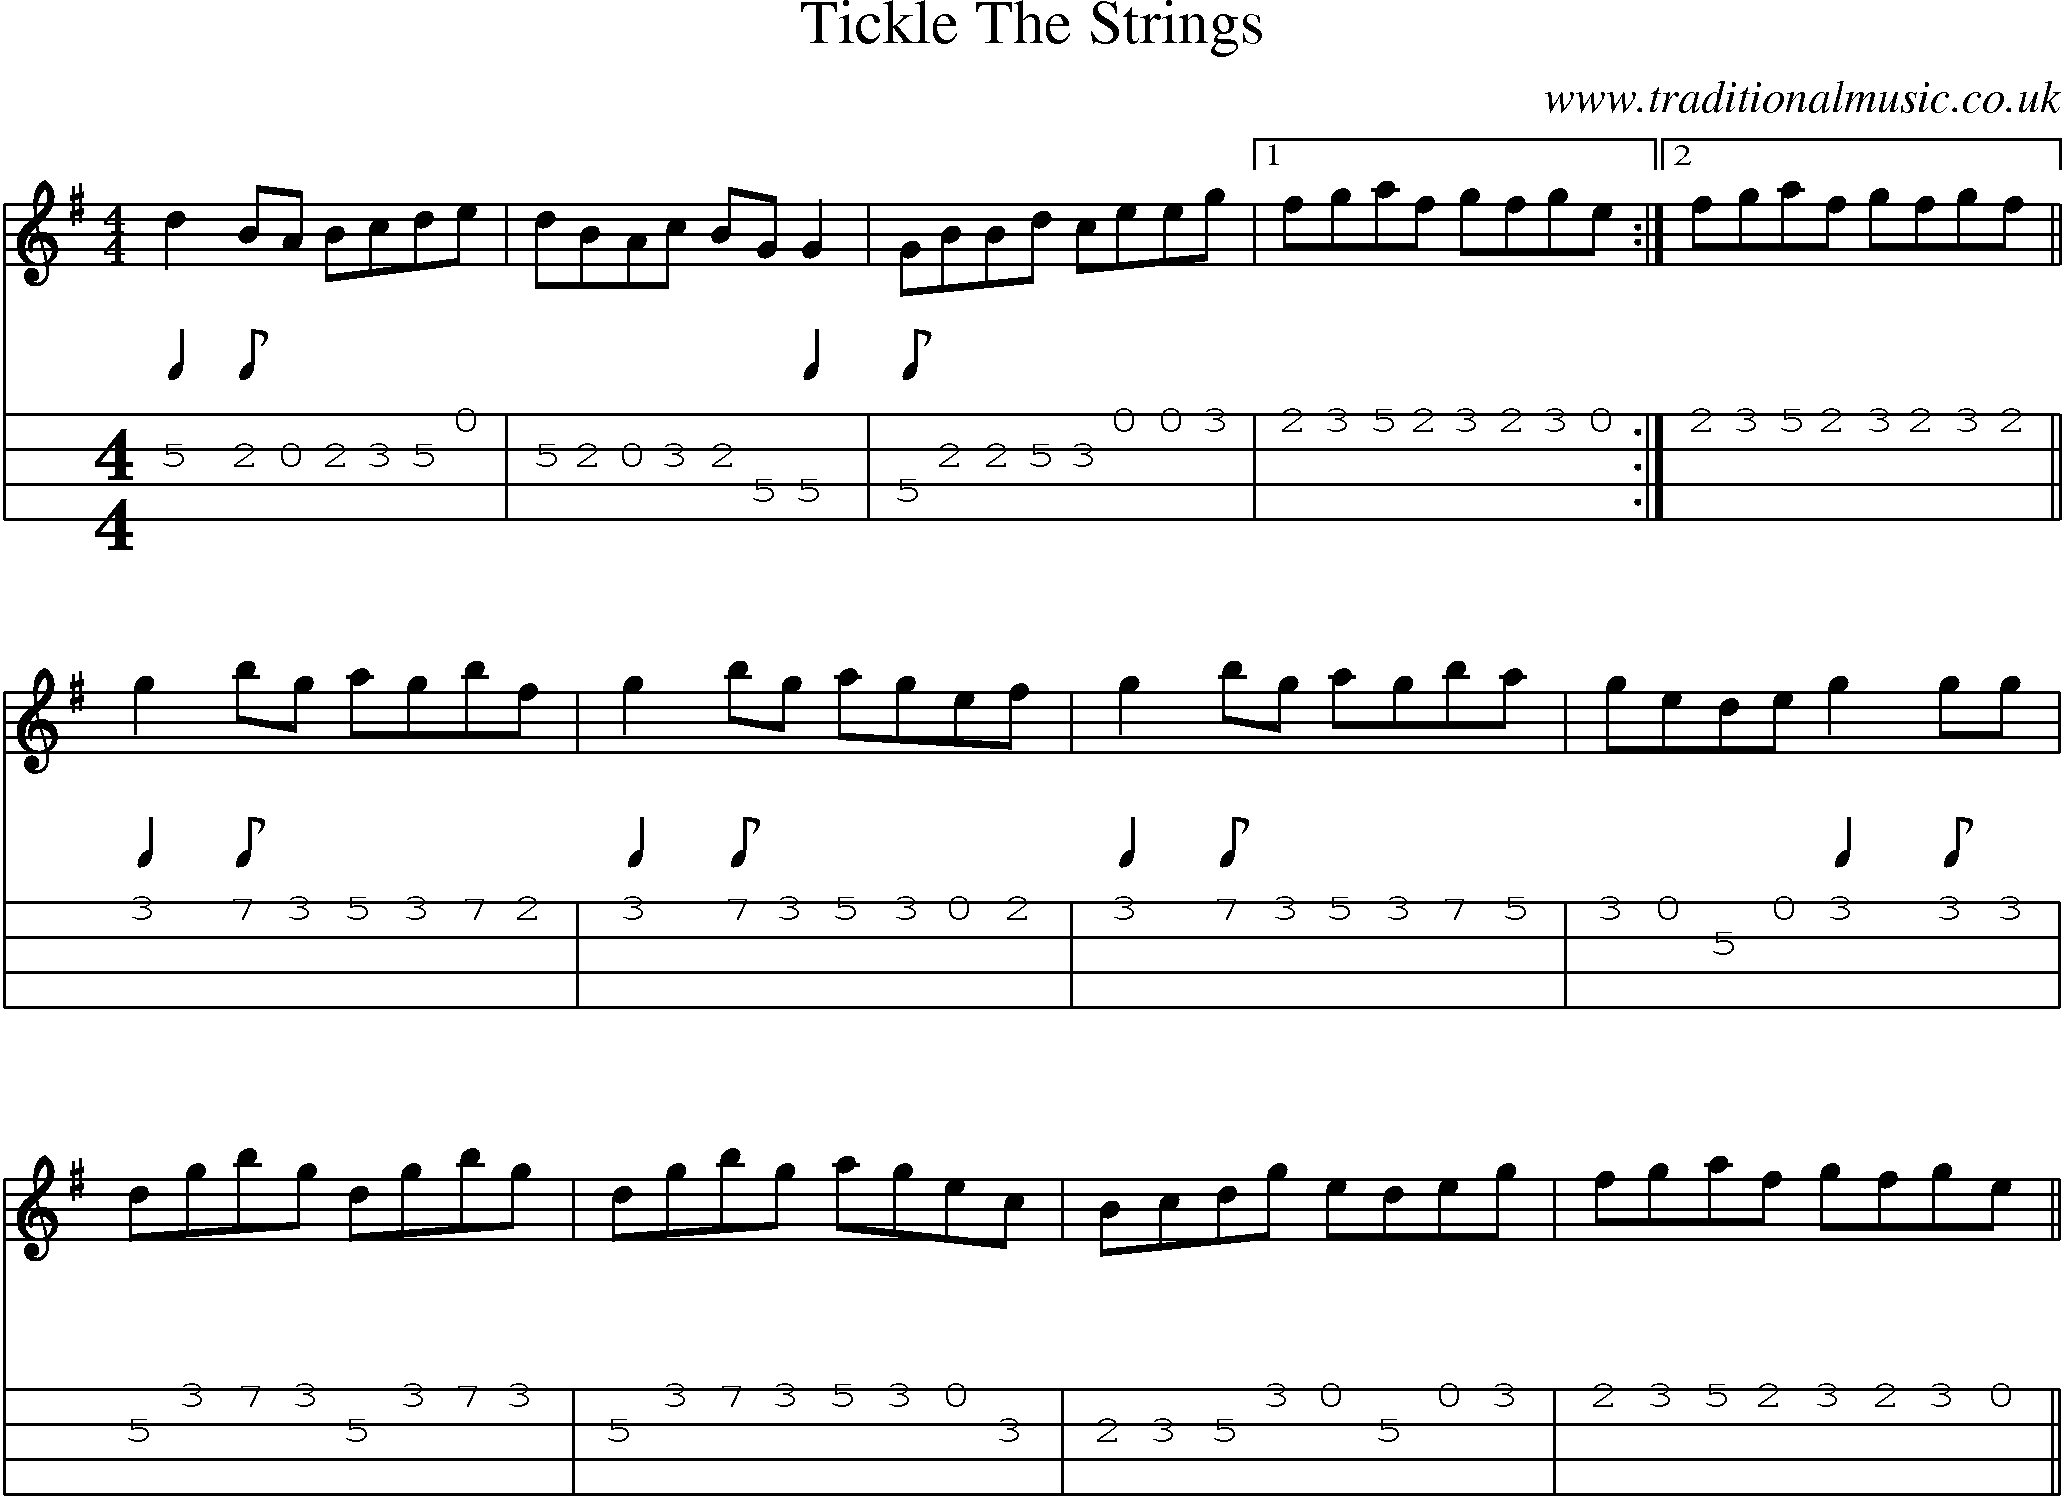 Music Score and Mandolin Tabs for Tickle Strings